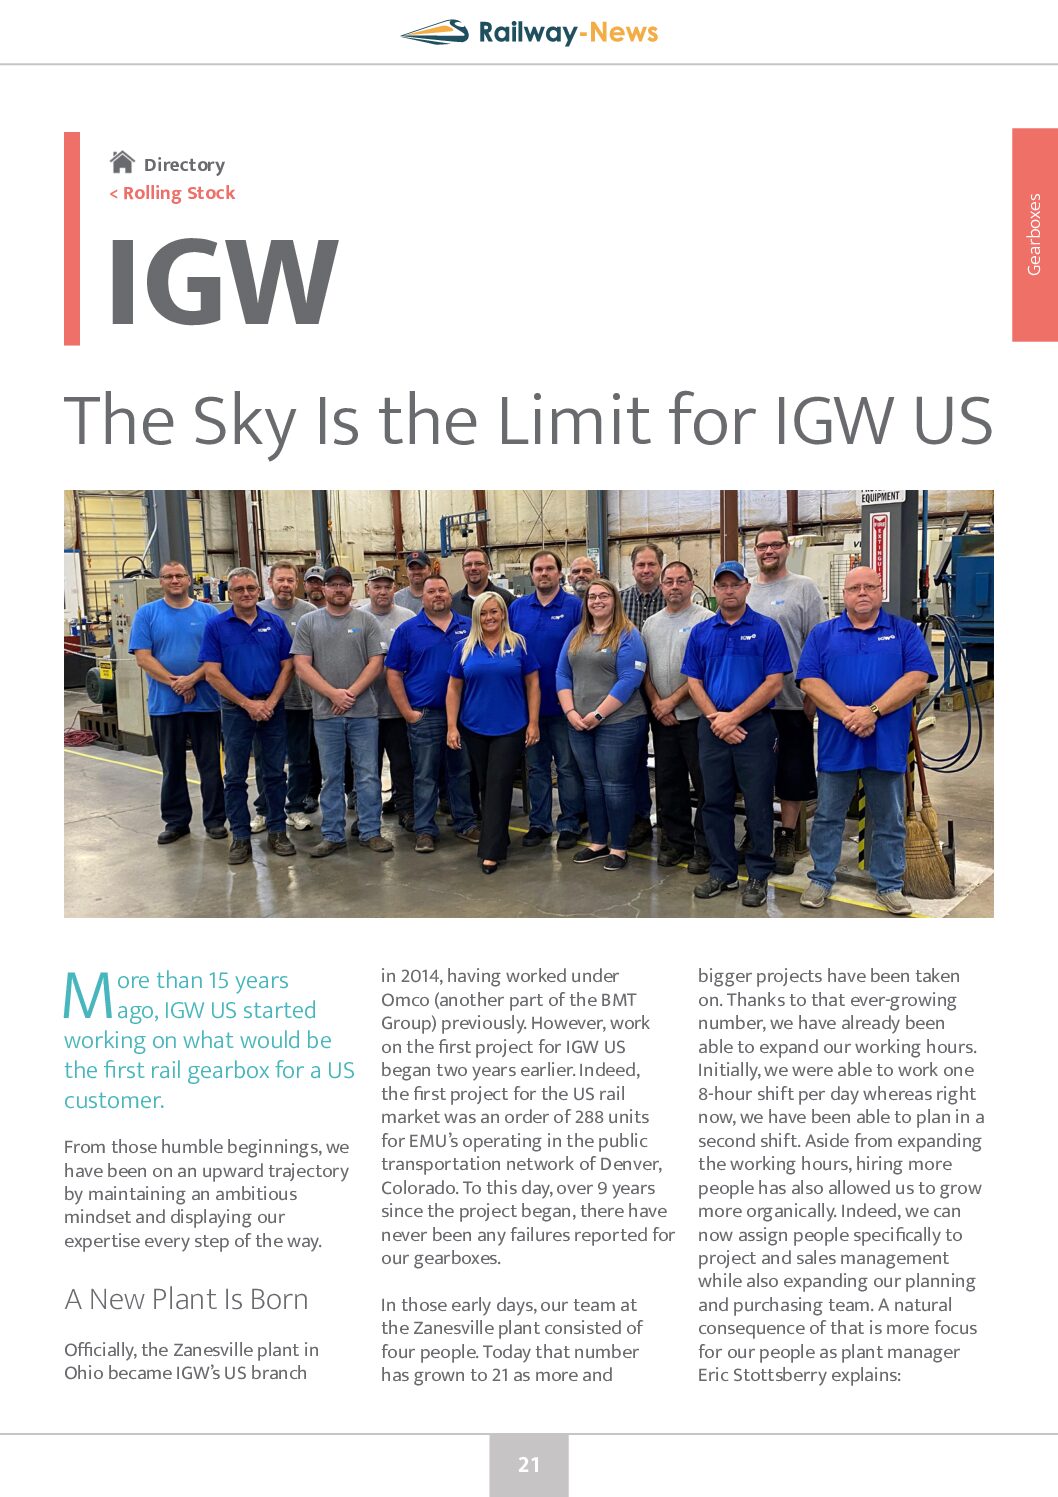 The Sky Is the Limit for IGW US